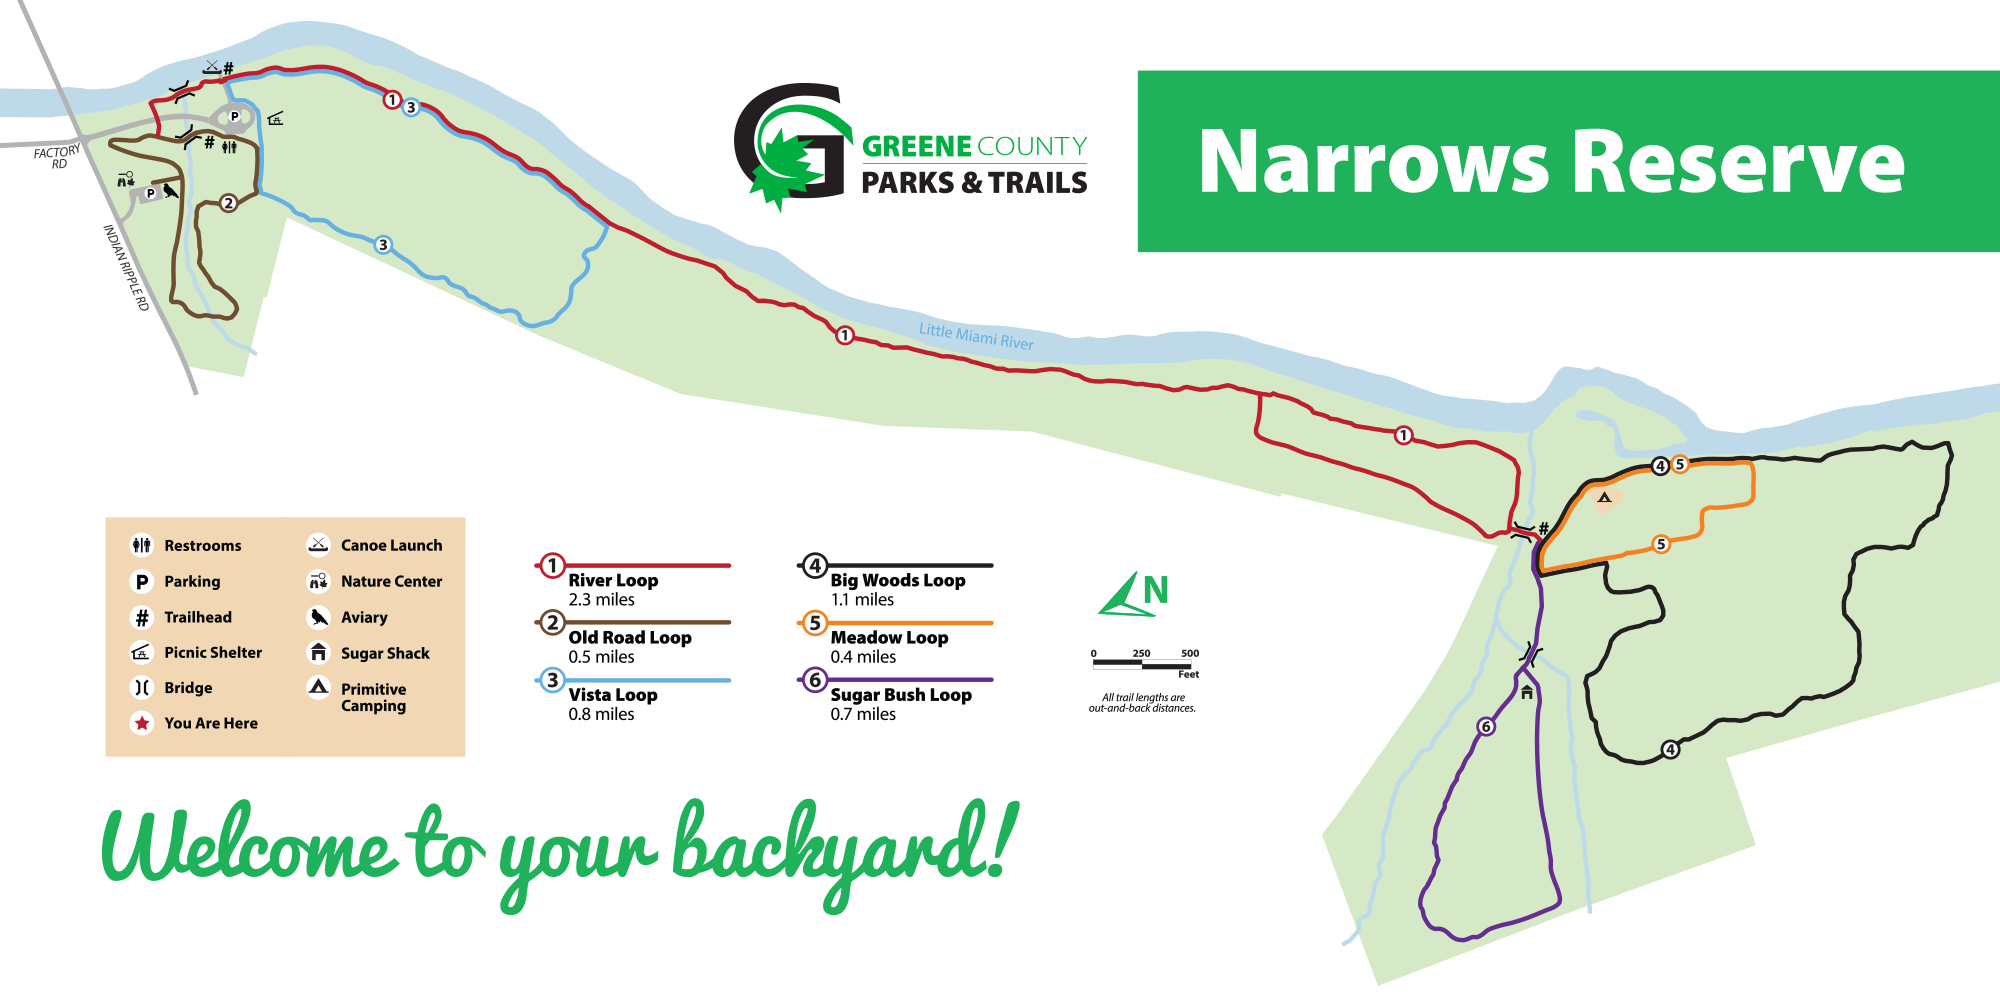 Link to larger map of Narrows Reserve